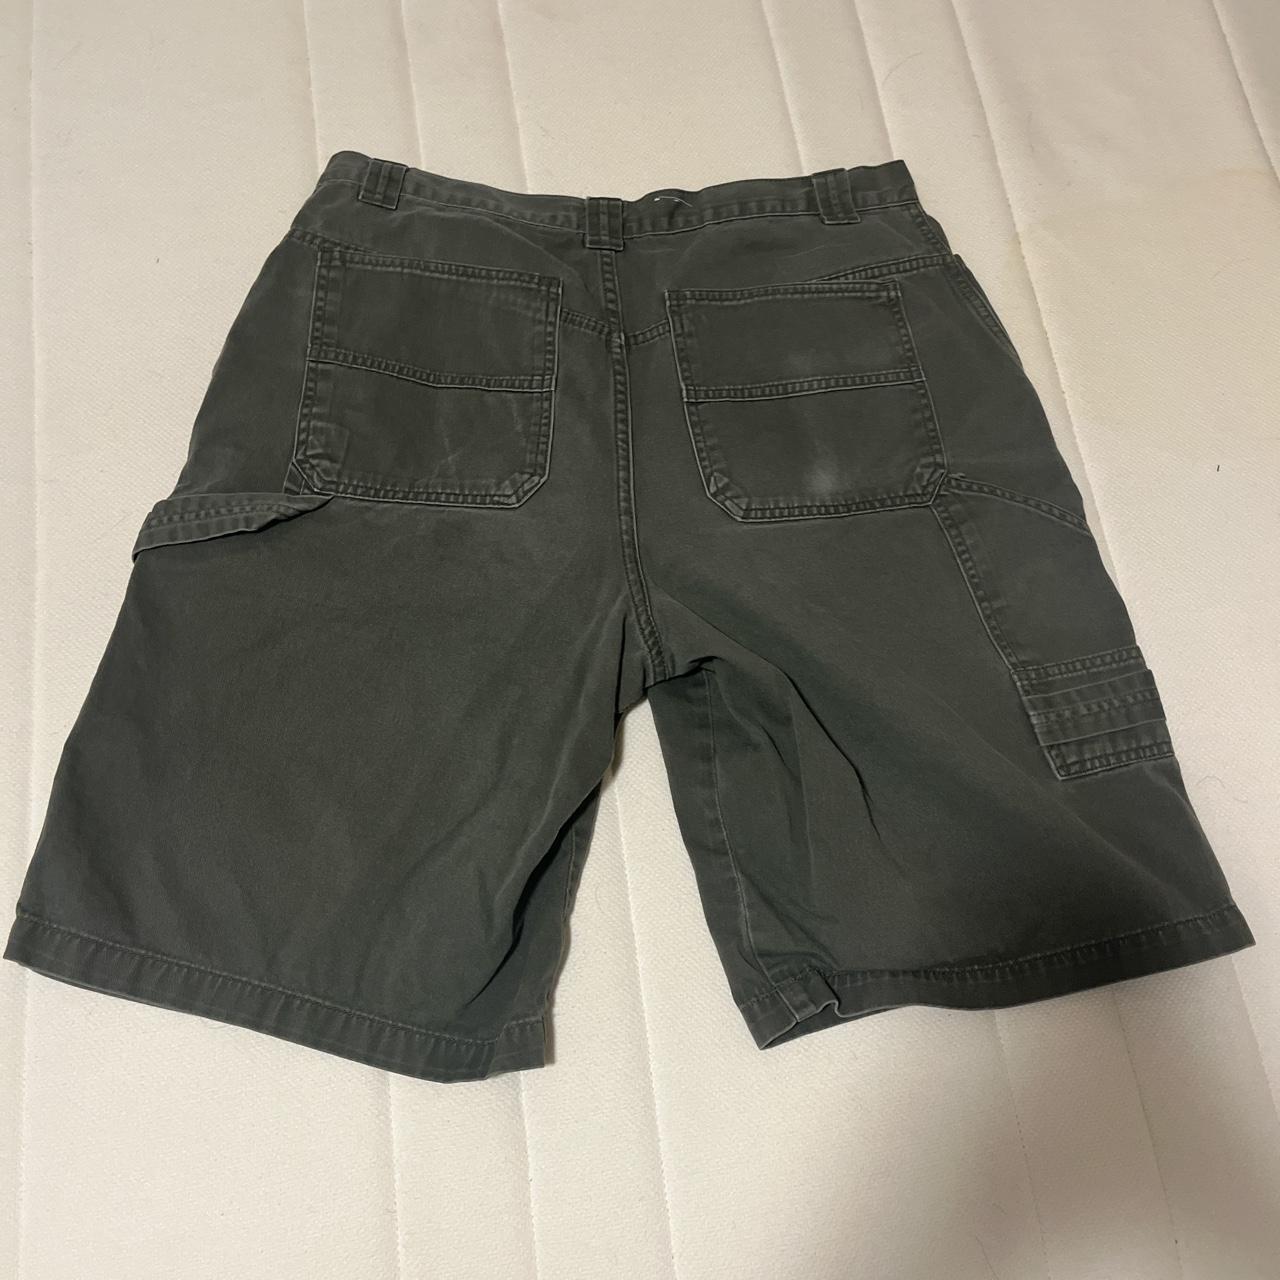 Utility Men's Green and Brown Shorts (2)